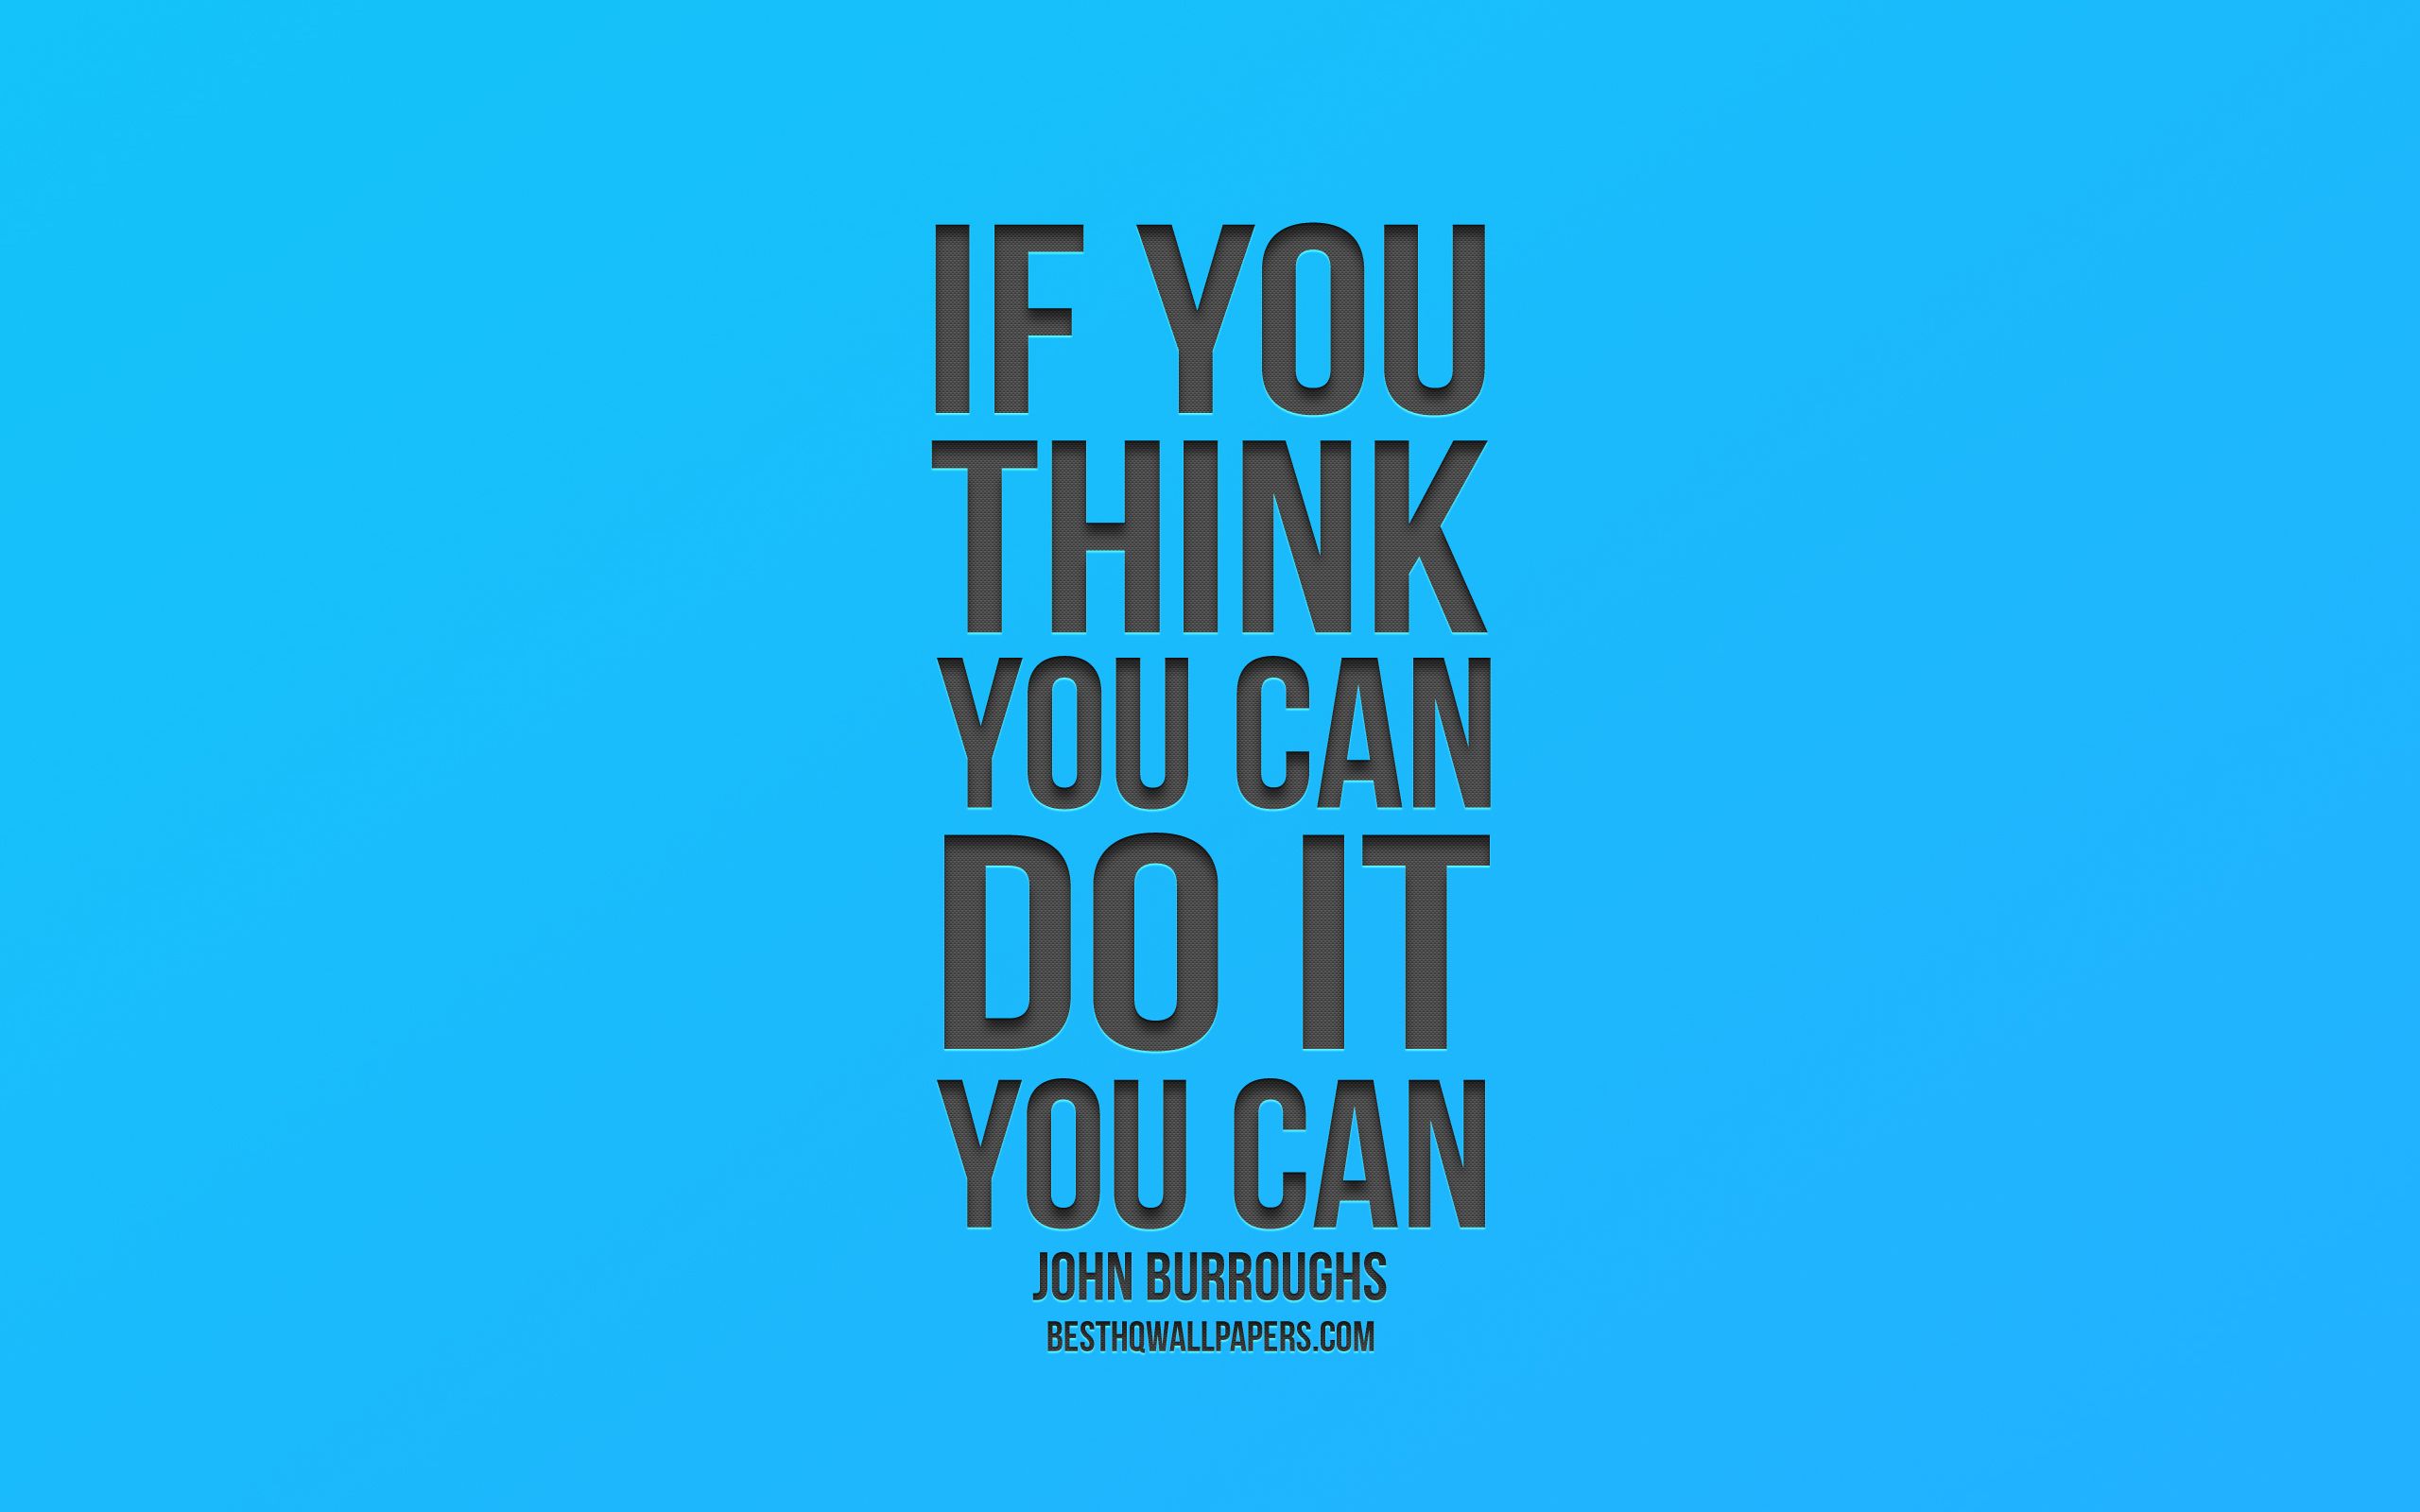 Download wallpaper If you think you can do it you can, John Burroughs Quotes, Blue Gradient Background, Popular Quotes, Motivation for desktop with resolution 2560x1600. High Quality HD picture wallpaper